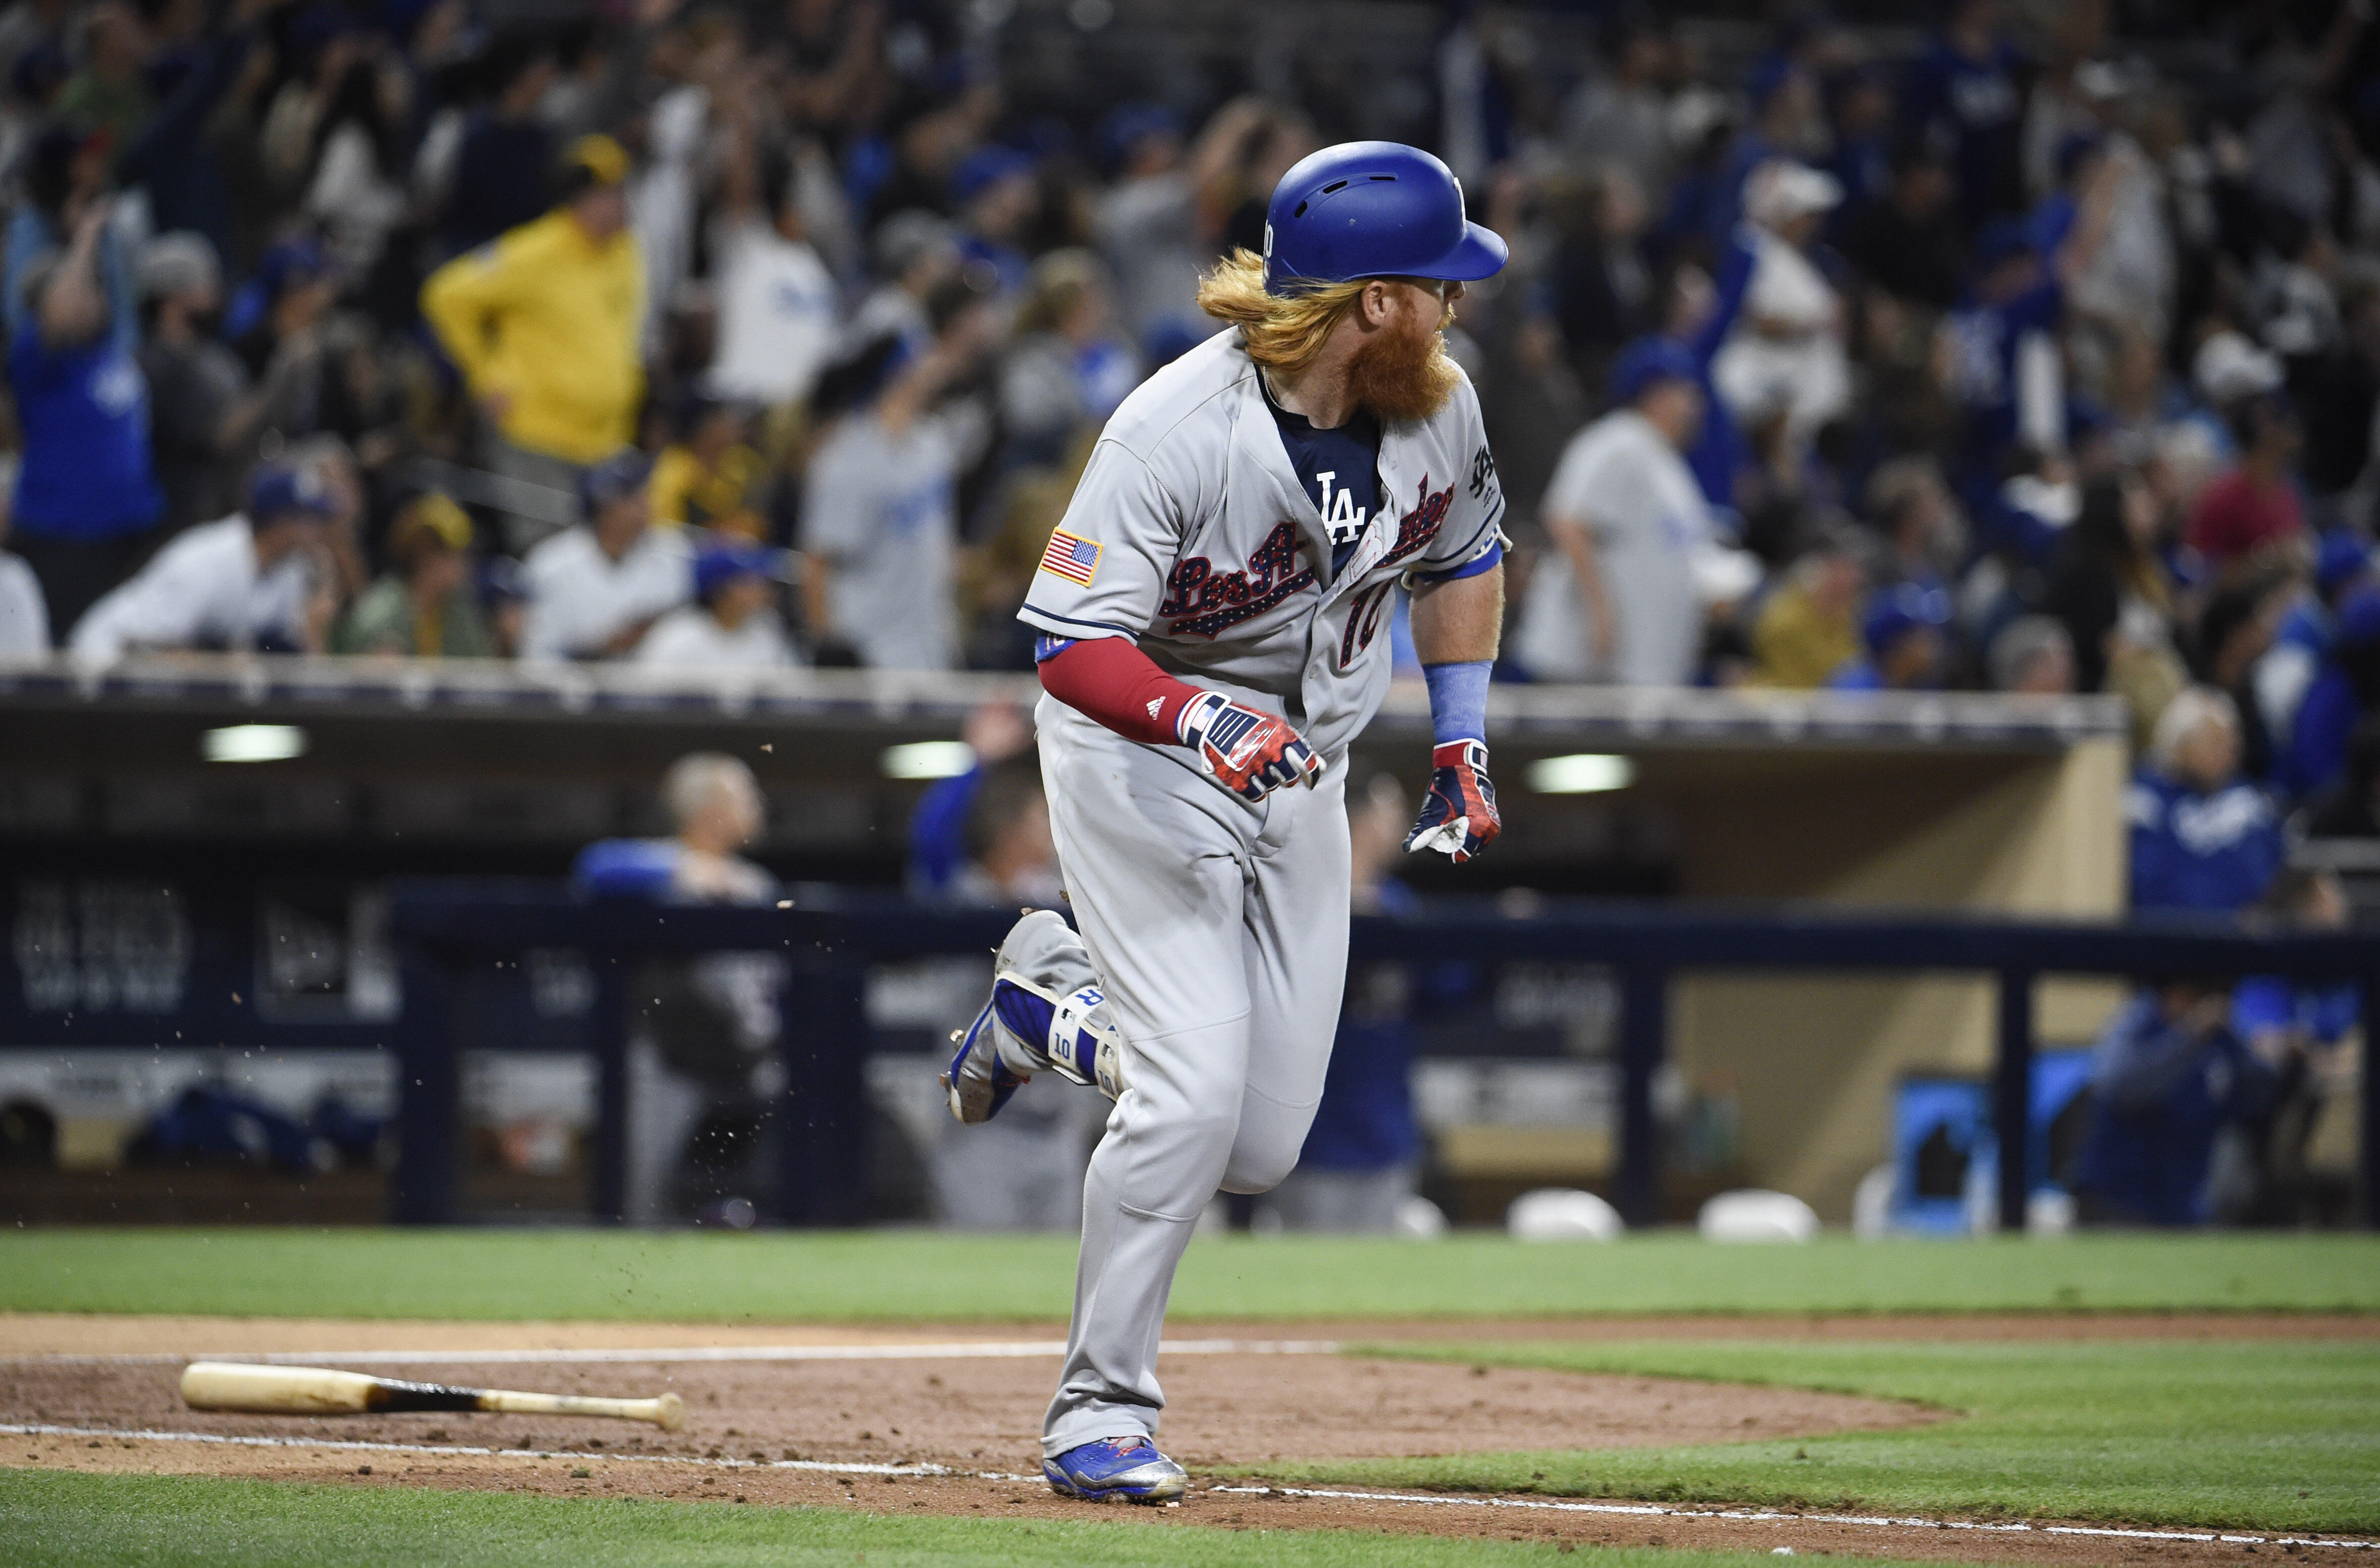 SAN DIEGO, CA - JULY 1: Justin Turner #10 of the Los Angeles Dodgers watches the flight of his  solo home run during the fifth inning of a baseball game against the San Diego Padres at PETCO Park on July 1, 2017 in San Diego, California. (Photo by Denis P